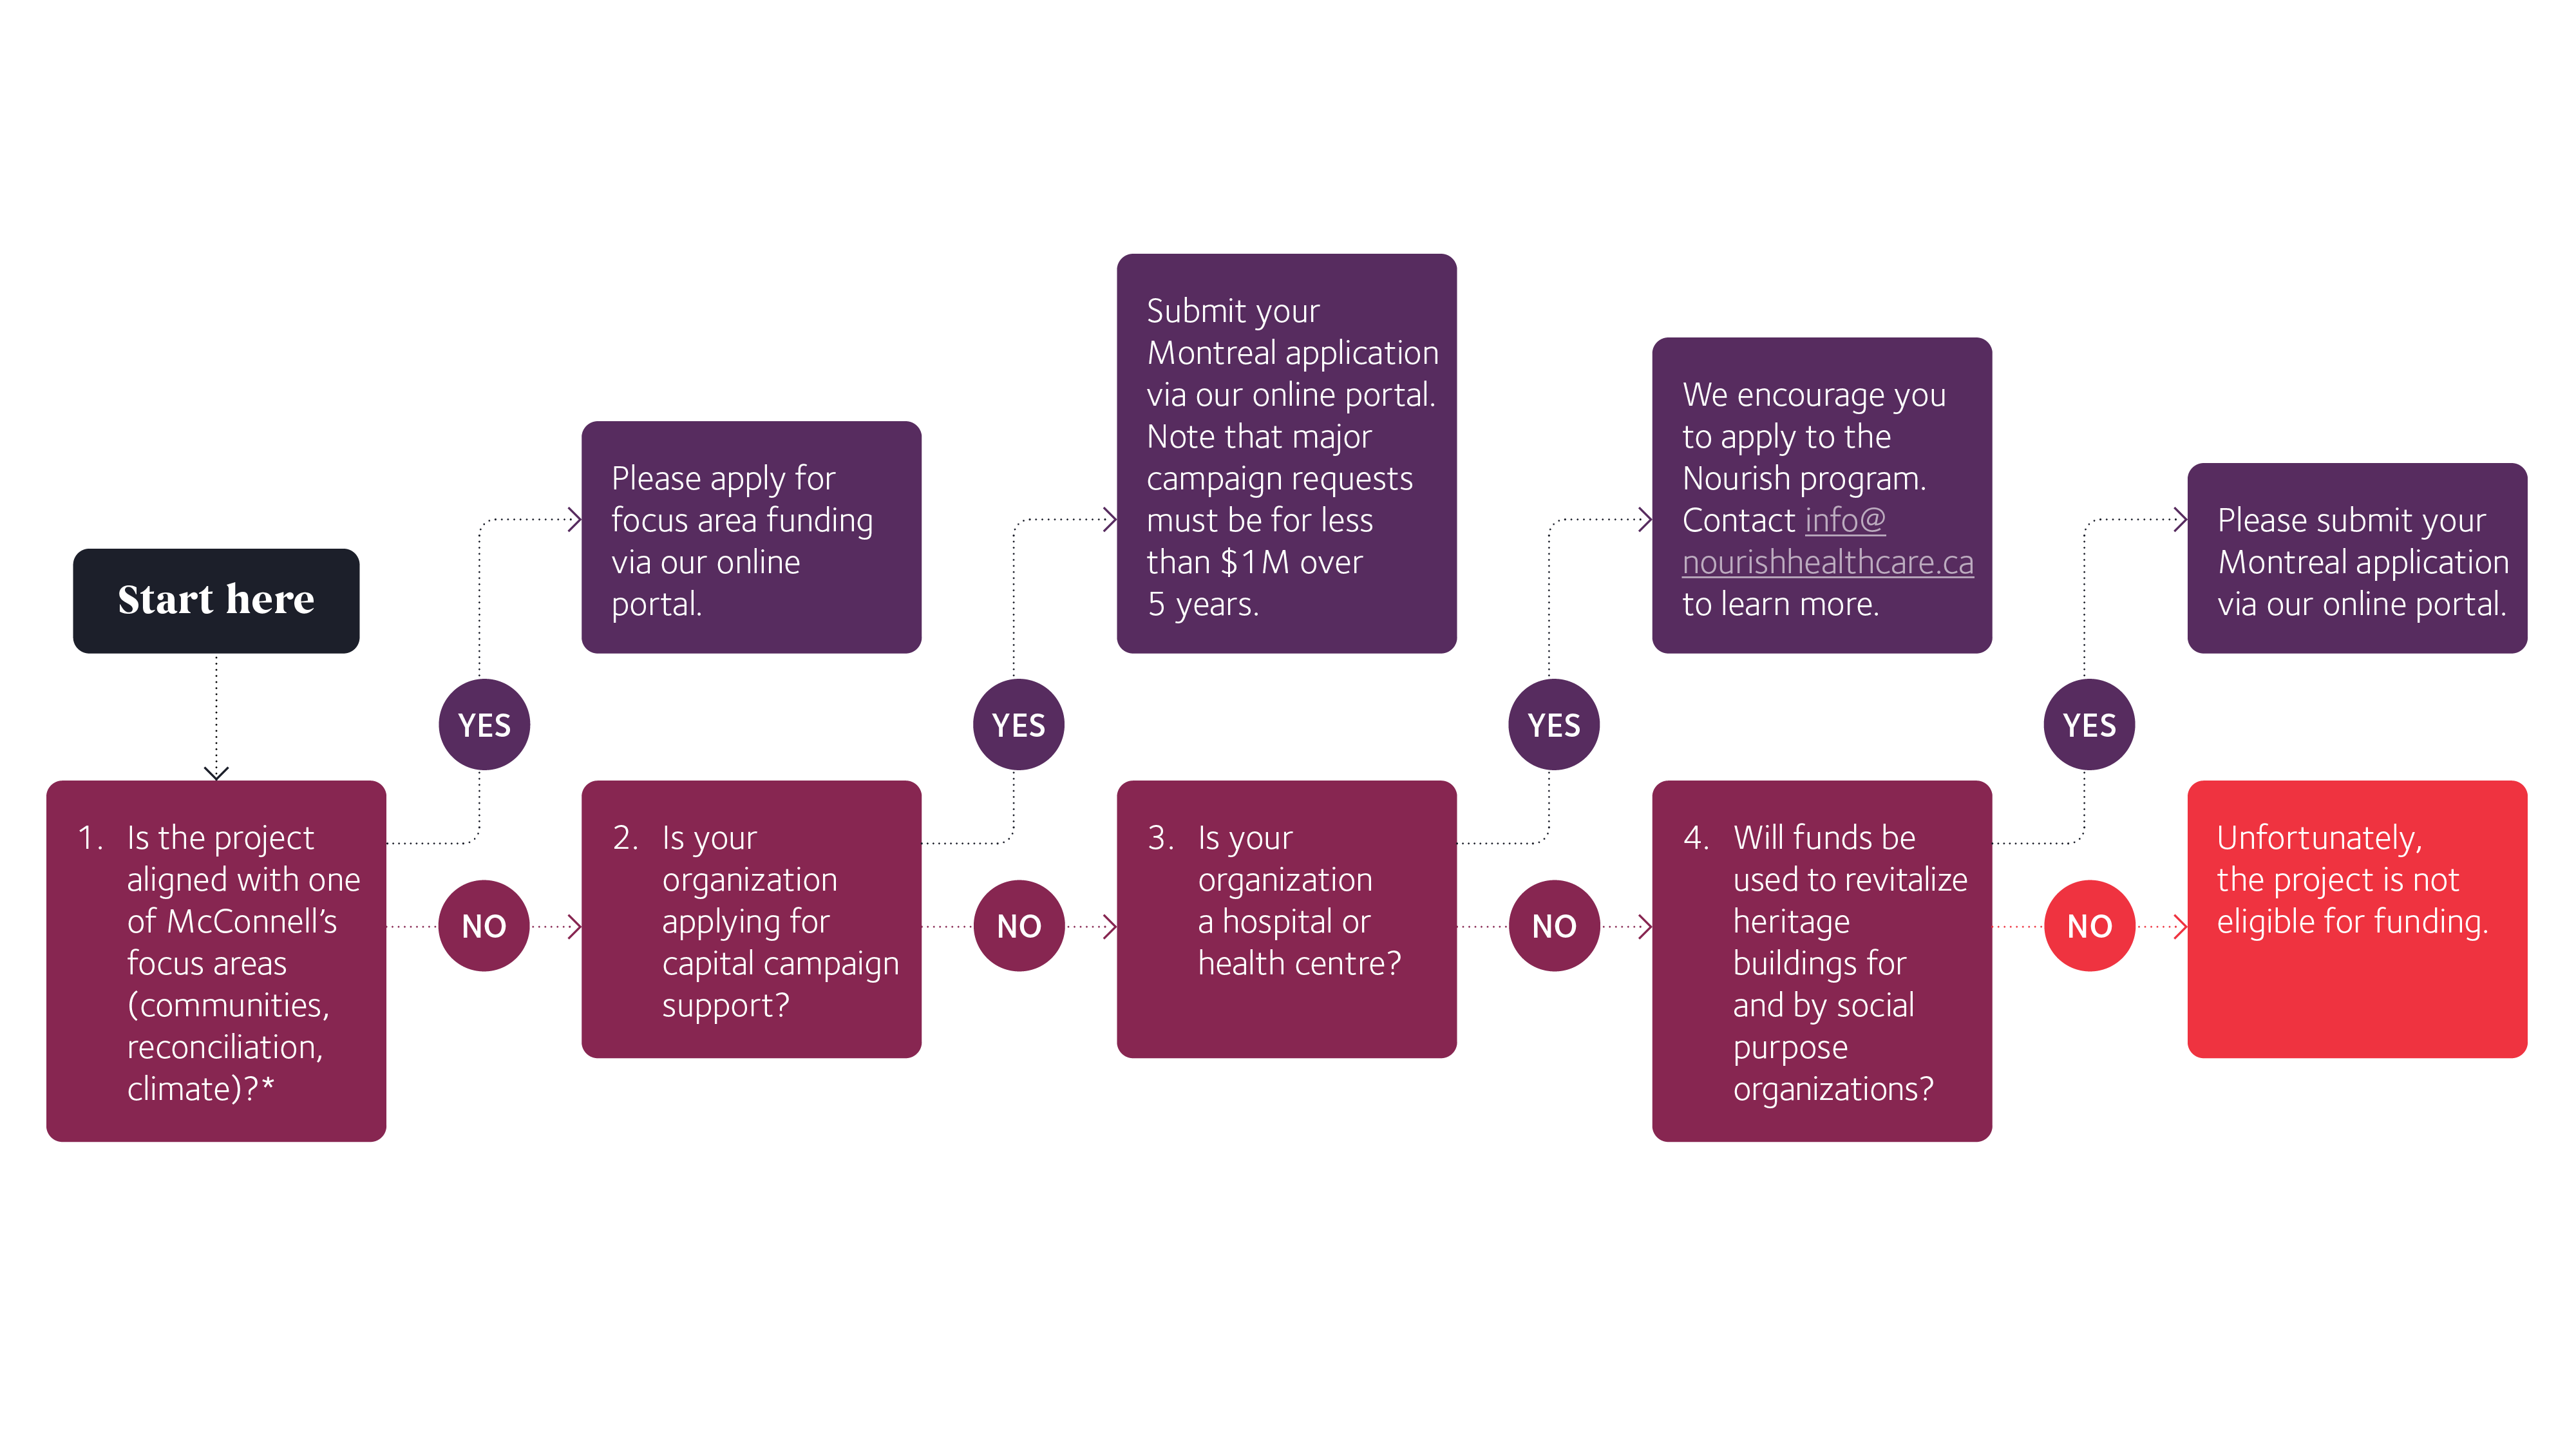 Decision tree for organizations seeking Montreal funding. Montreal funding is for capital campaign support or for revitalizing heritage buildings.